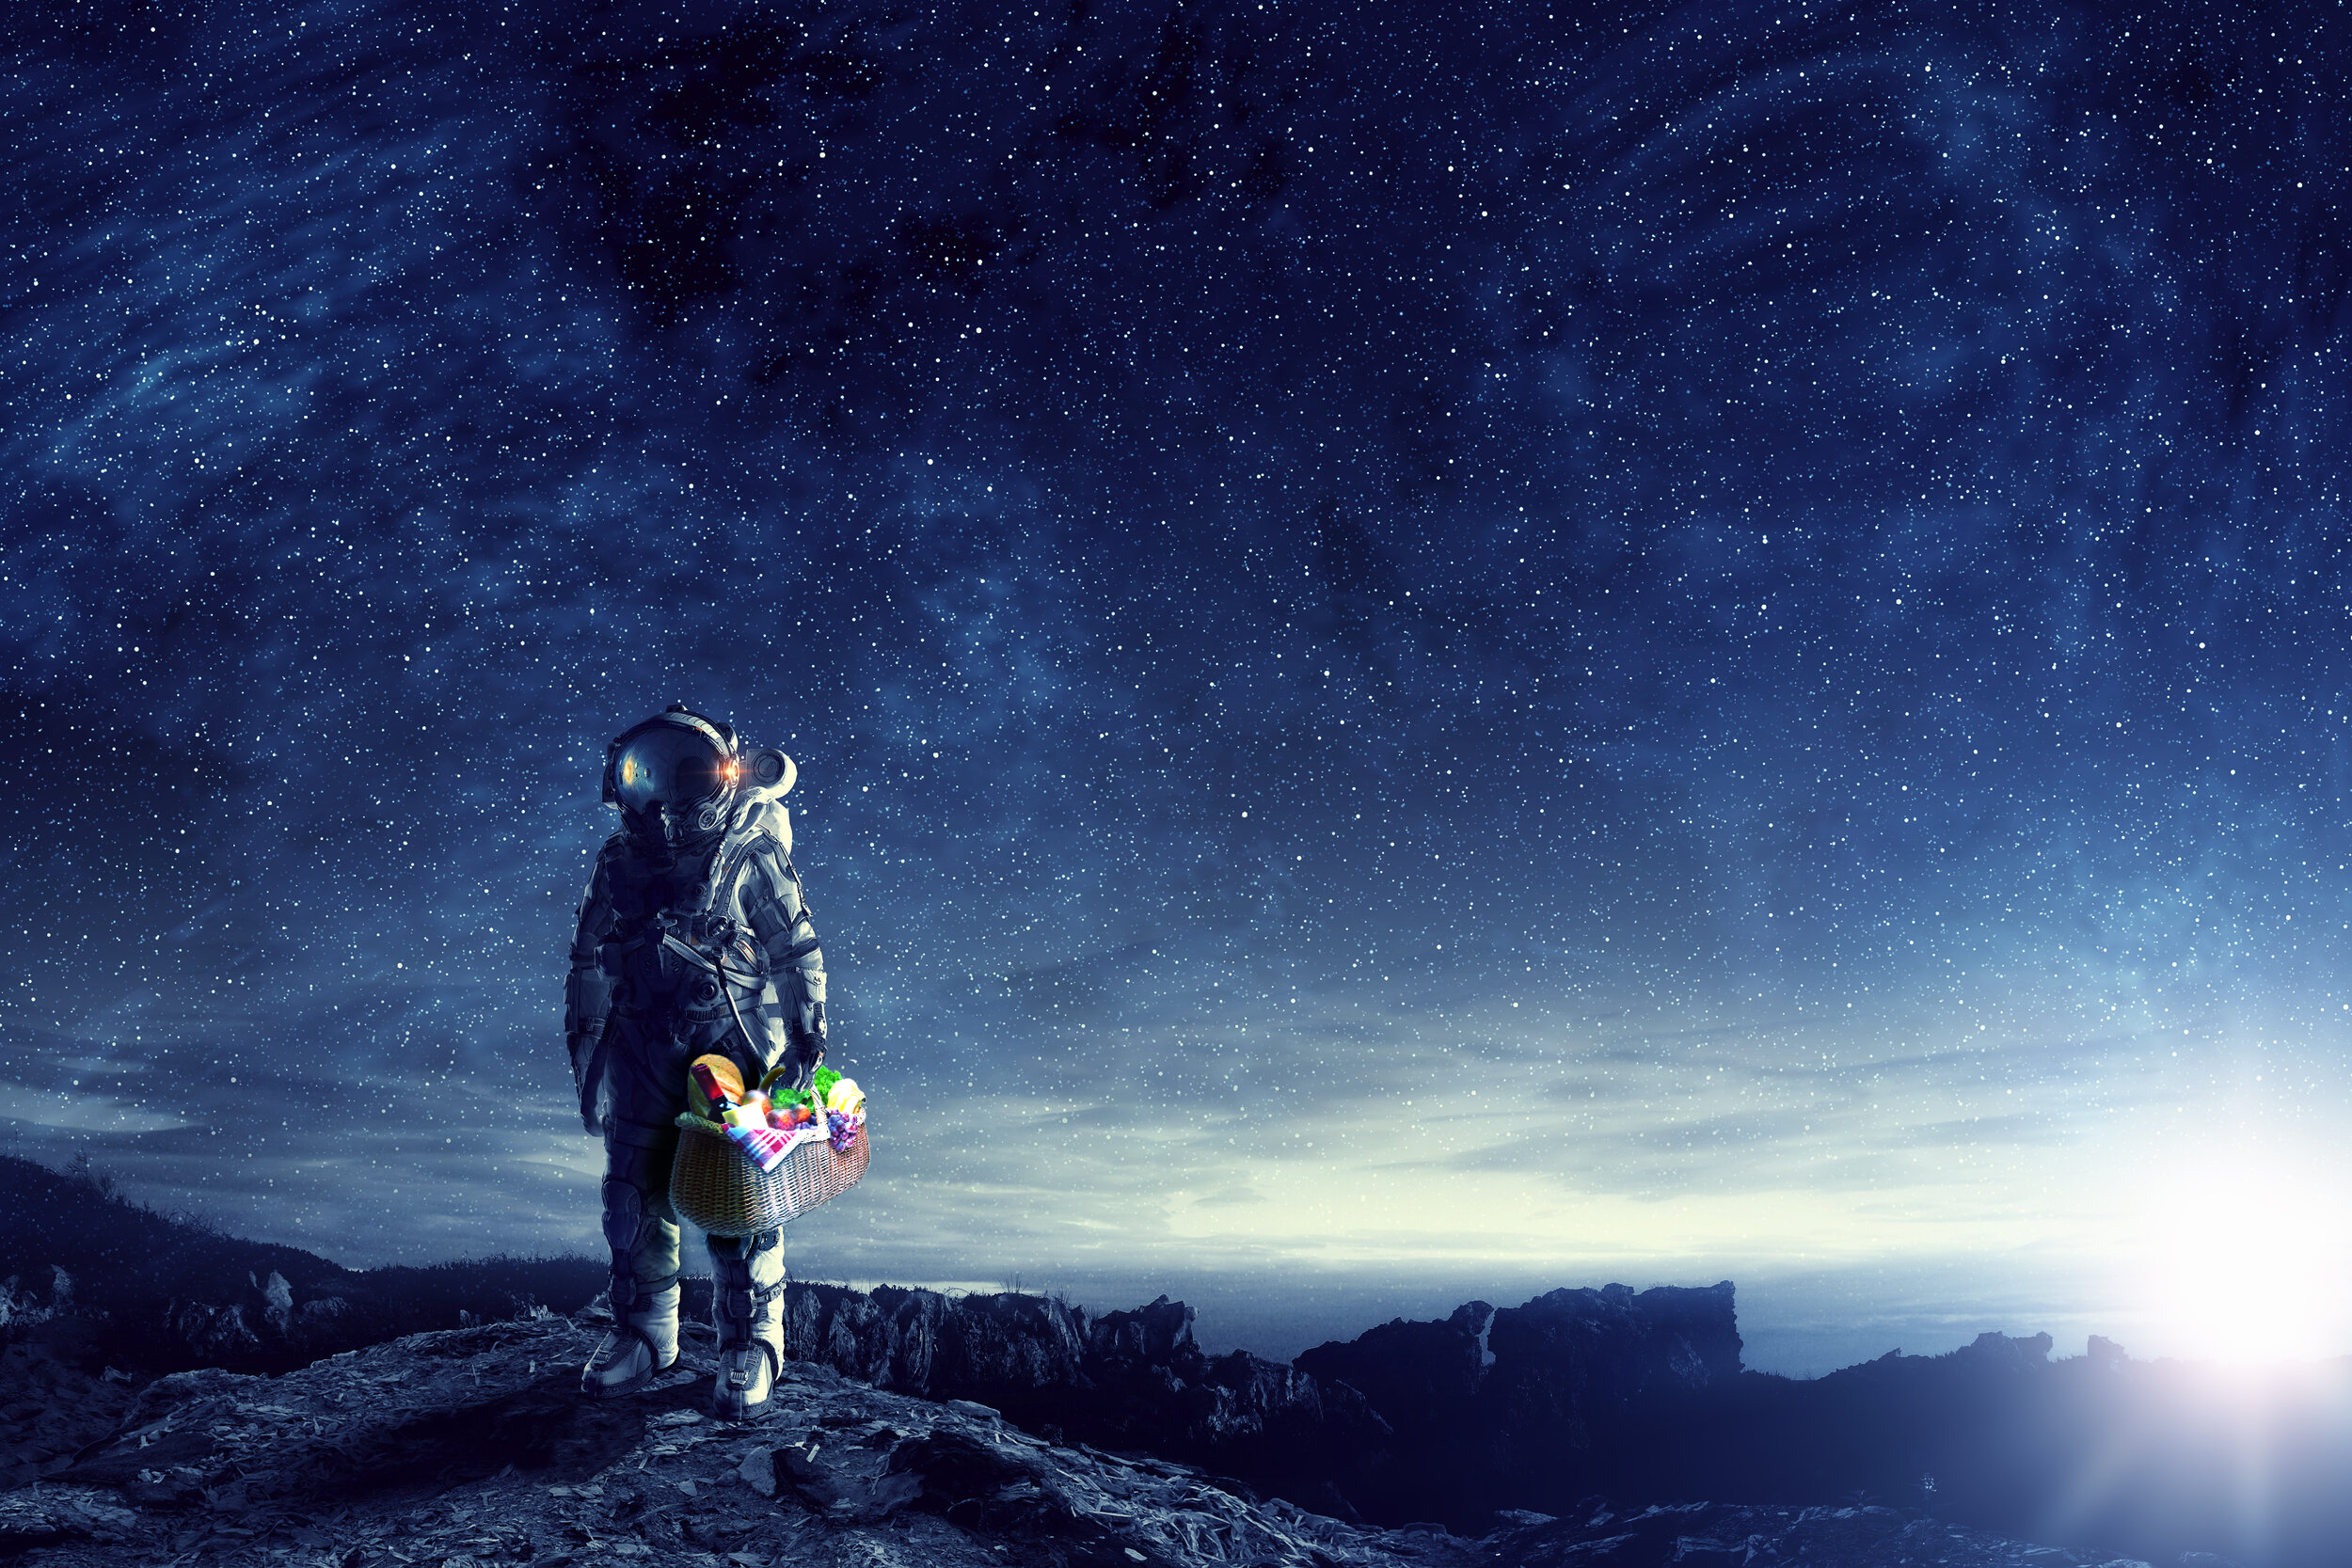 An illustration of an astronaut carrying a picnic basket on a barren planetary landscape with a sky full of stars.